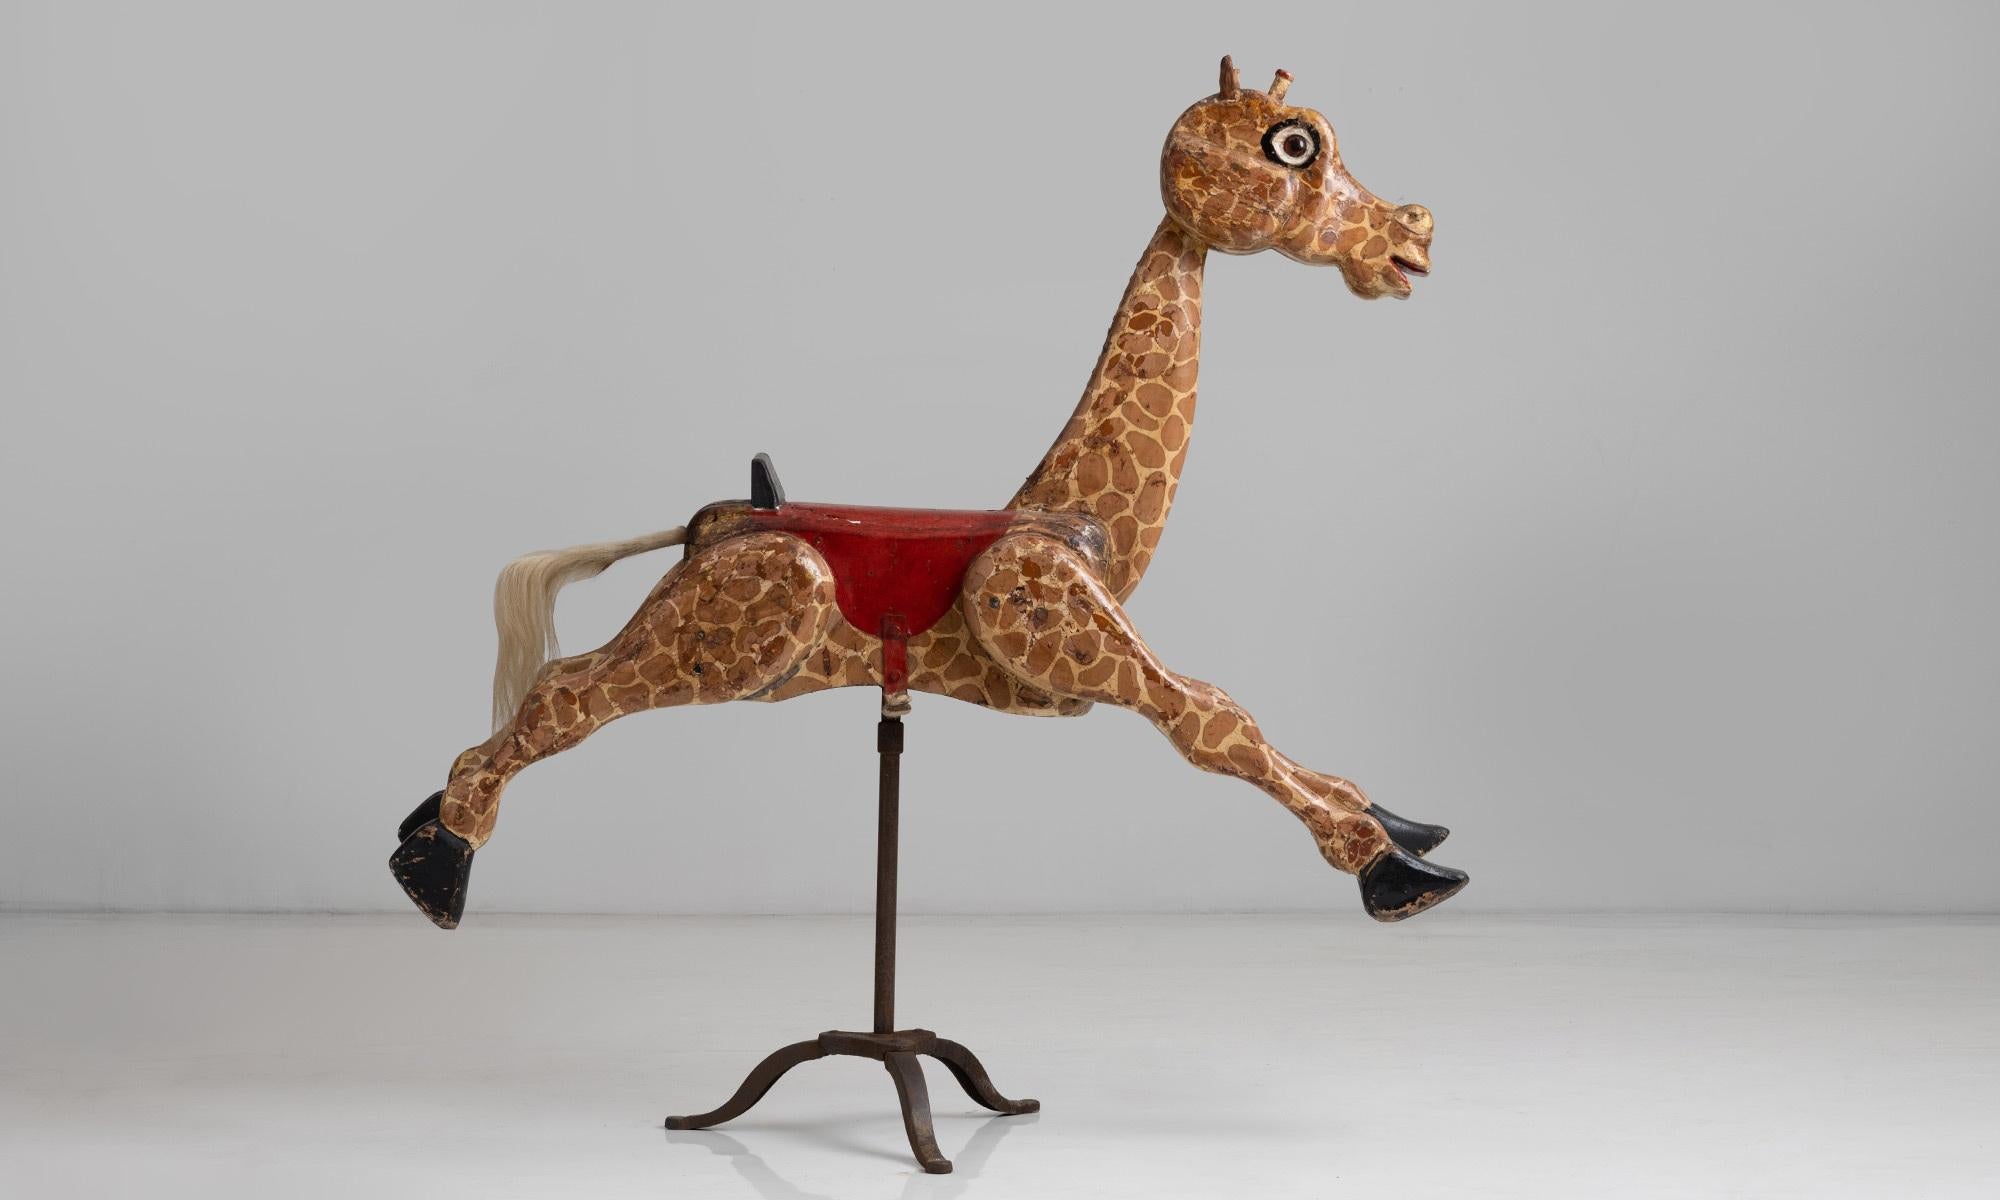 56 Inch tall Giraffe carousel ride.

England, circa 1920.

Carved wooden giraffe in original hand painted finish with large glass eyes.

Measures: 56”W X 12”D X 56.5”H.
 